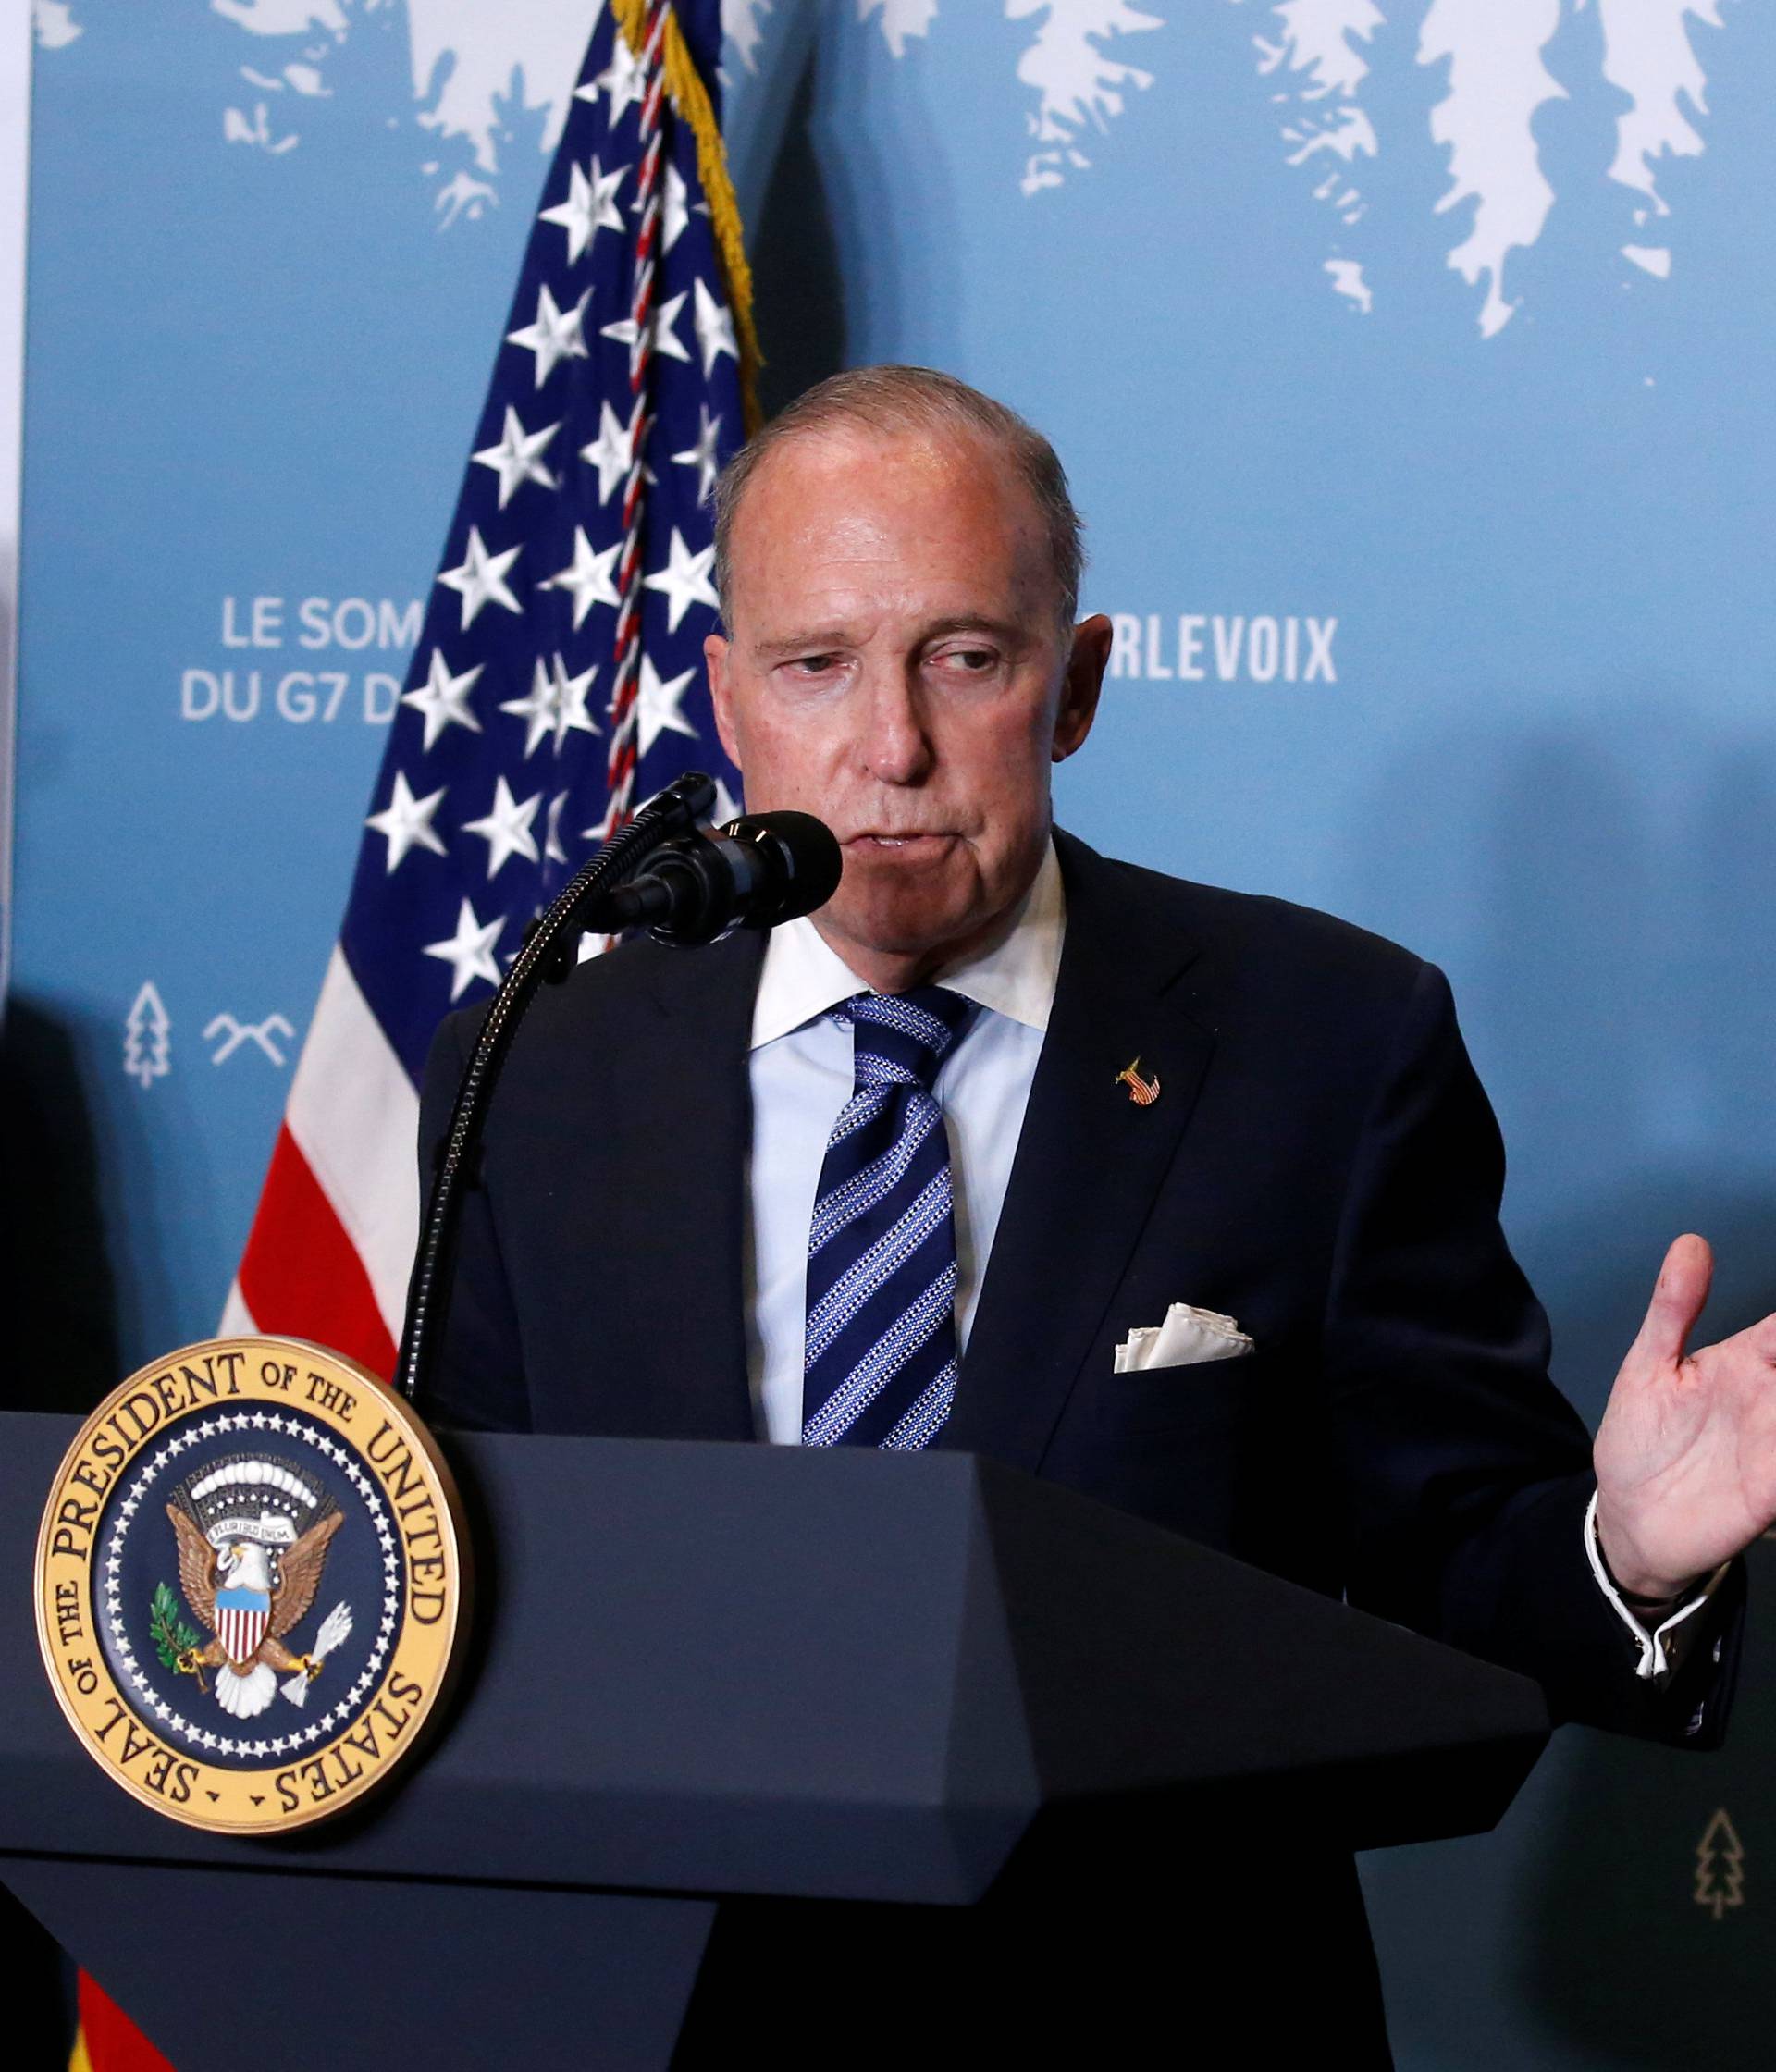 Larry Kudlow gives remarks during a a press briefing with U.S. President Donald Trump at the G-7 summit in the Charlevoix city of La Malbaie